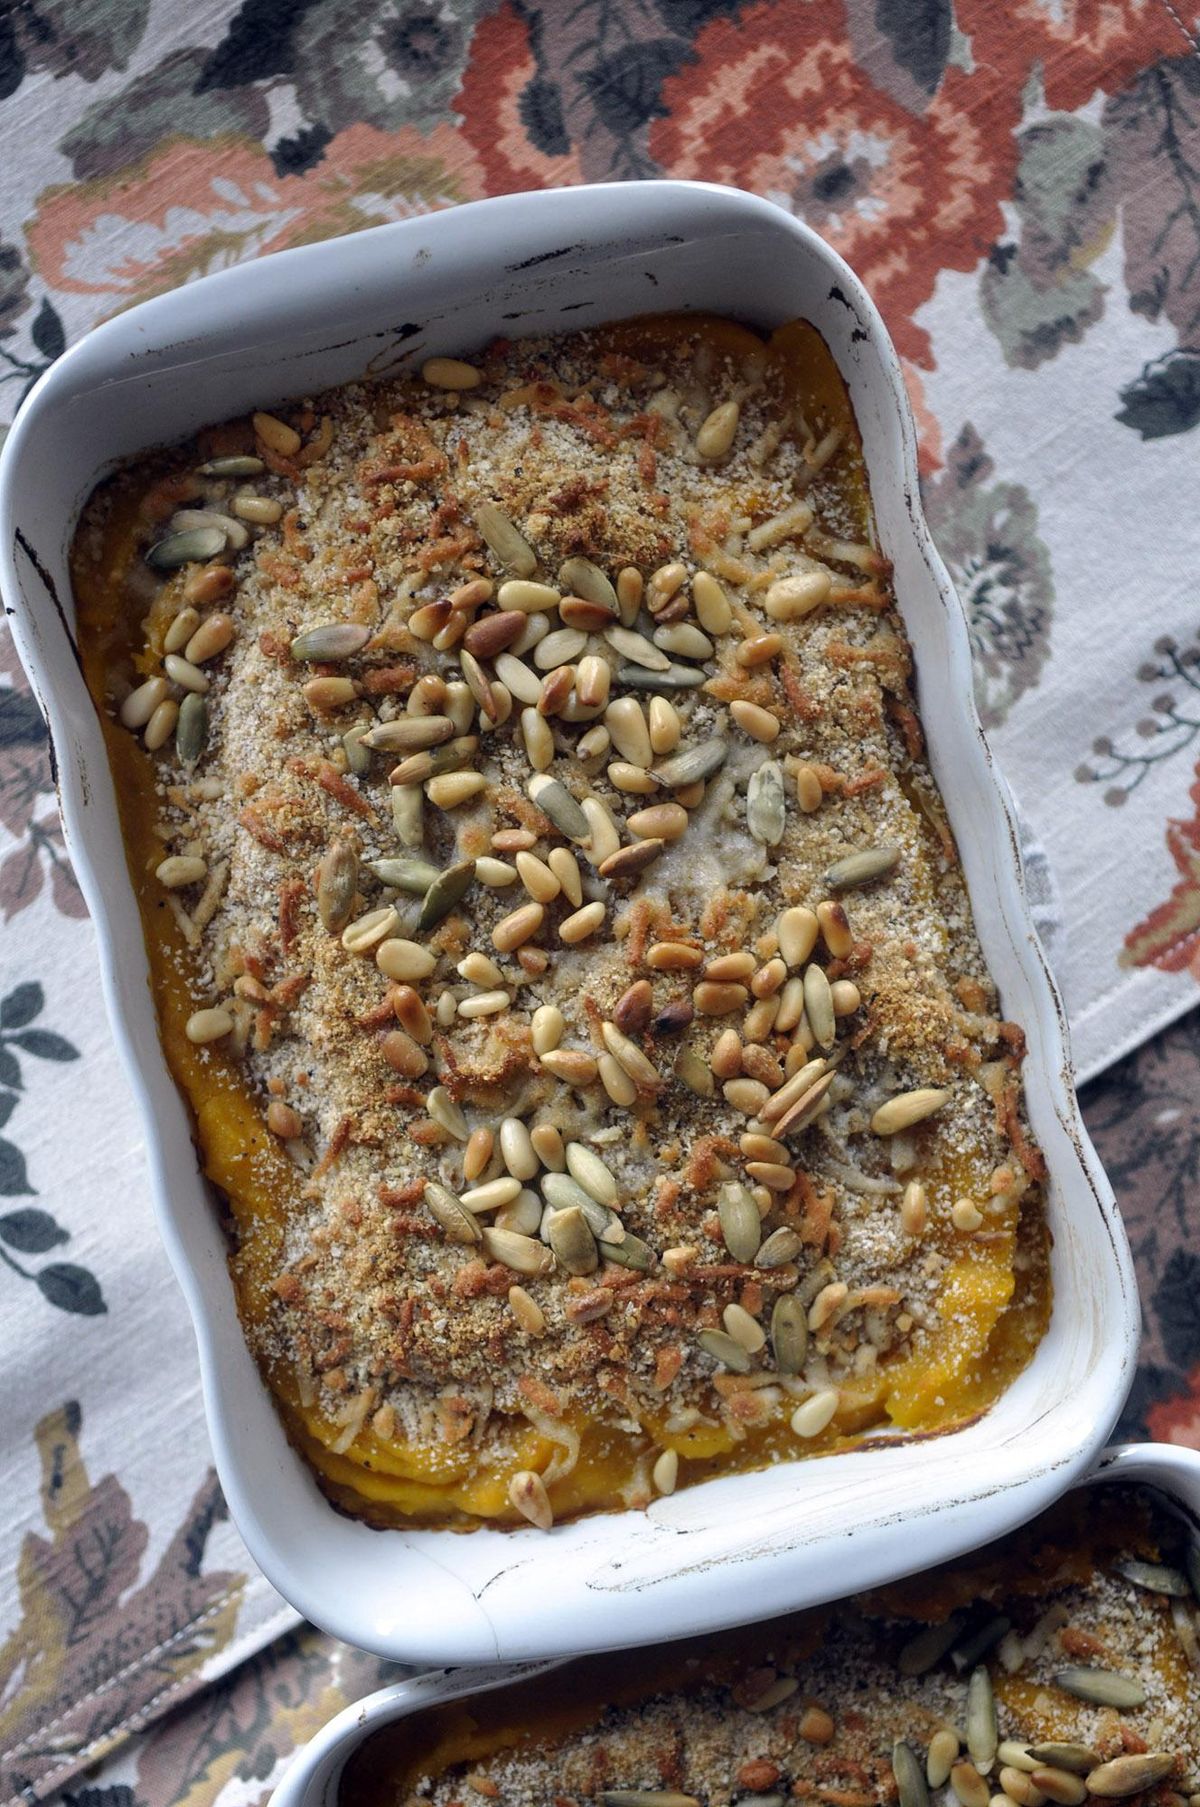 The bright orange puree of cute-as-a-button sugar pumpkins is worth the extra effort - and not only for pies, but for savory dishes, too, such as this sugar pumpkin gratin. ADRIANA JANOVICH adrianaj@spokesman.com (Adriana Janovich / The Spokesman-Review)